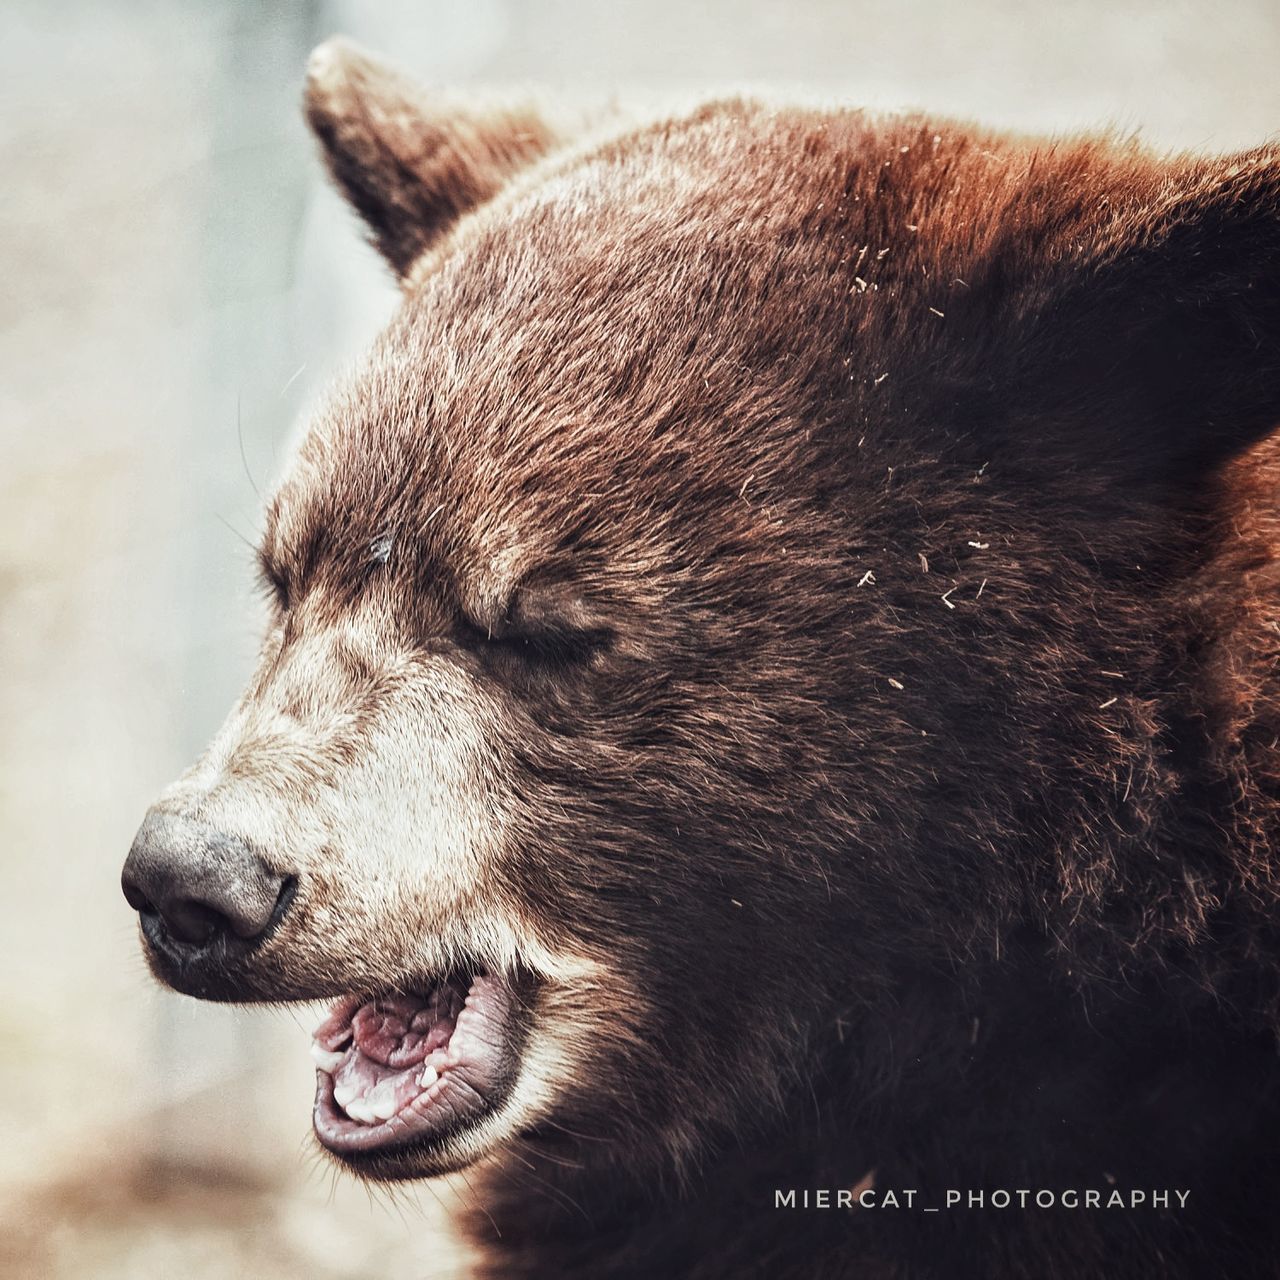 animal, animal themes, mammal, one animal, brown bear, animal wildlife, wildlife, bear, grizzly bear, animal body part, no people, close-up, animal head, mouth open, outdoors, nature, nose, focus on foreground, snout, brown